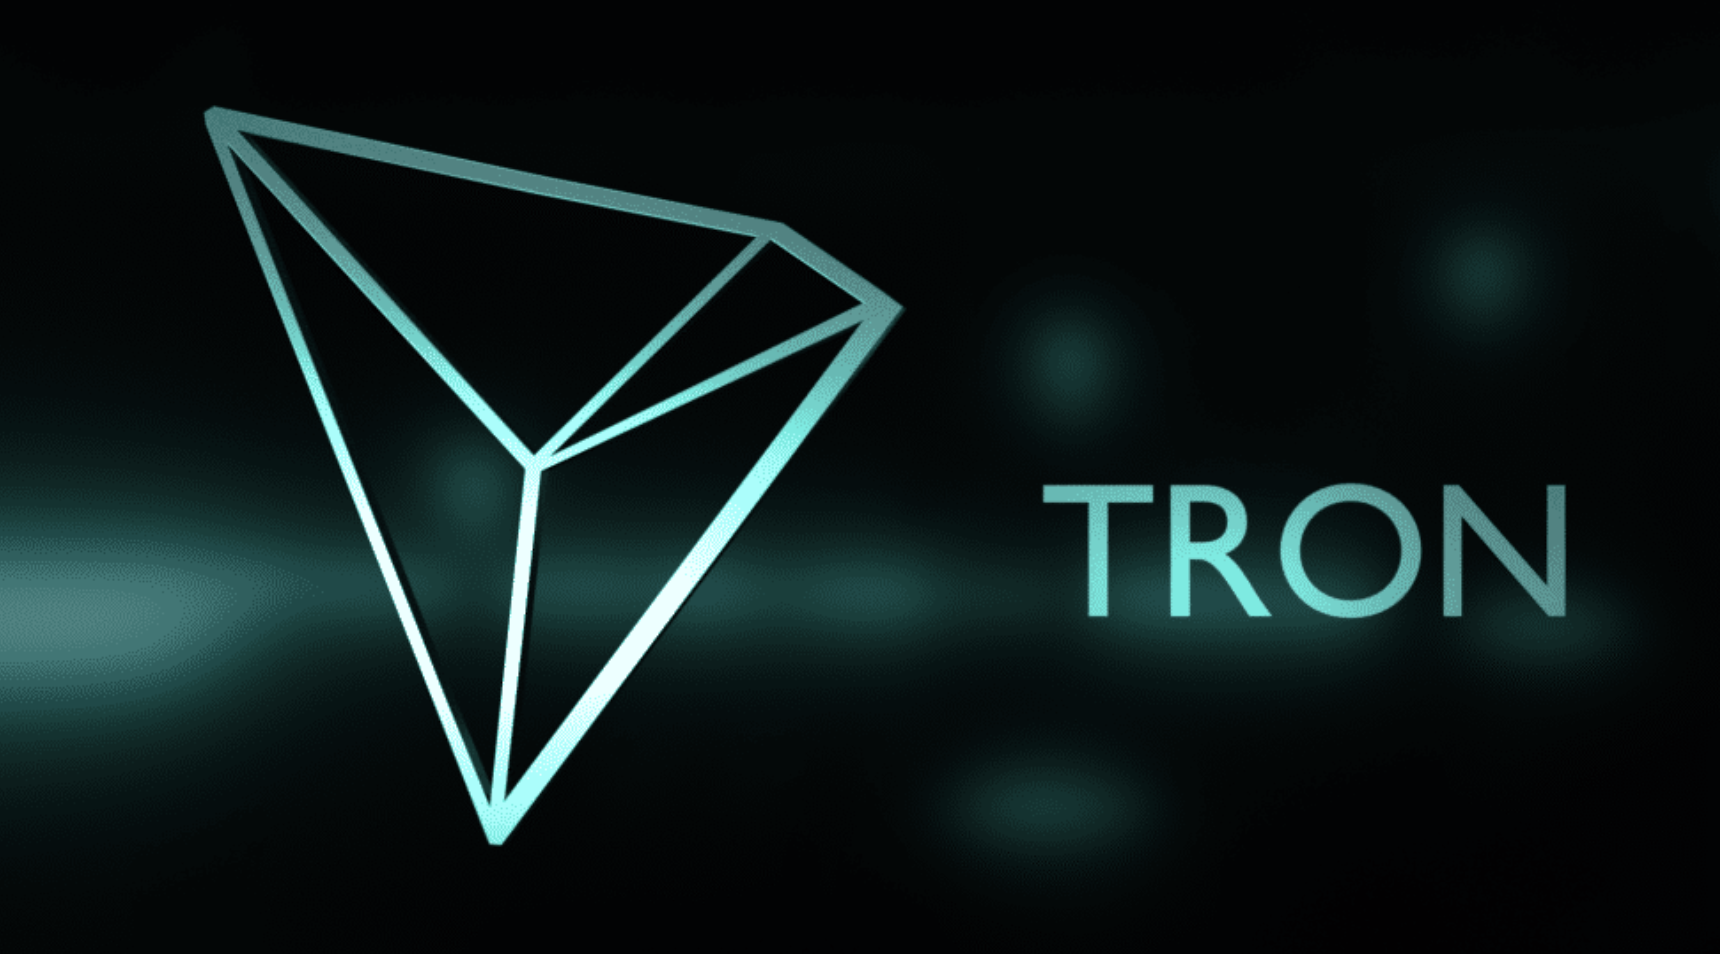 TRON Teams Up with Shopping.io, Makes TRX Usable for eCommerce